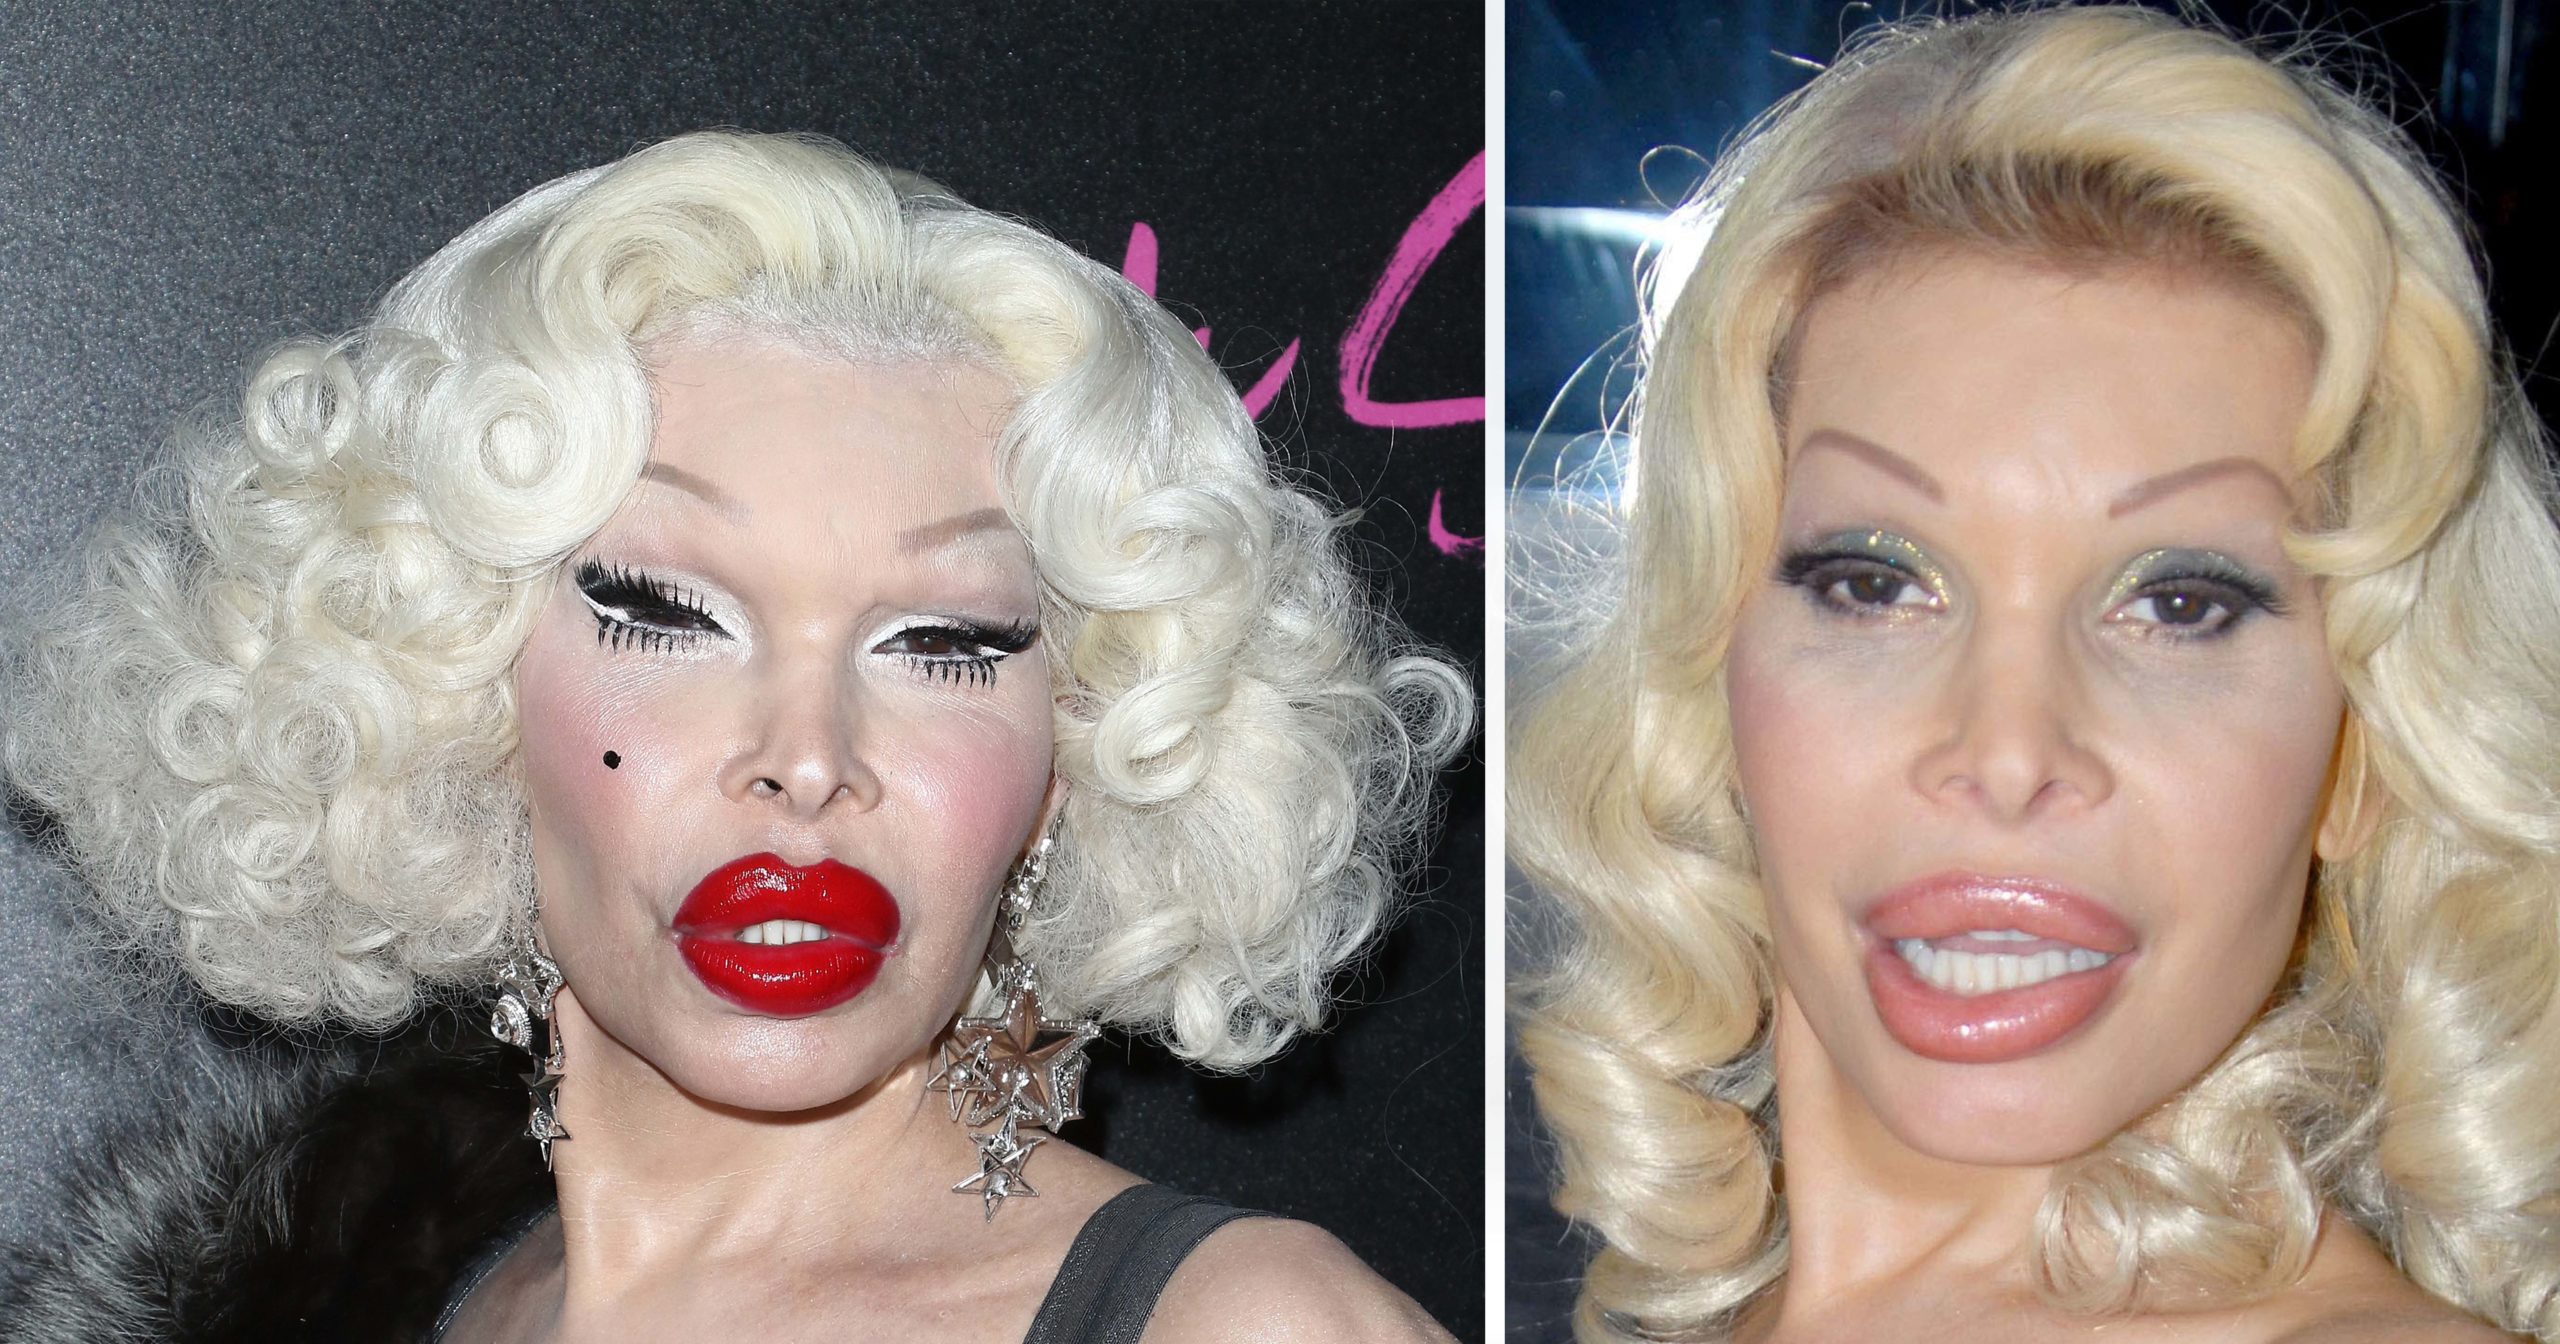 Amanda Lepore, "the most expensive body on earth": Pictur...